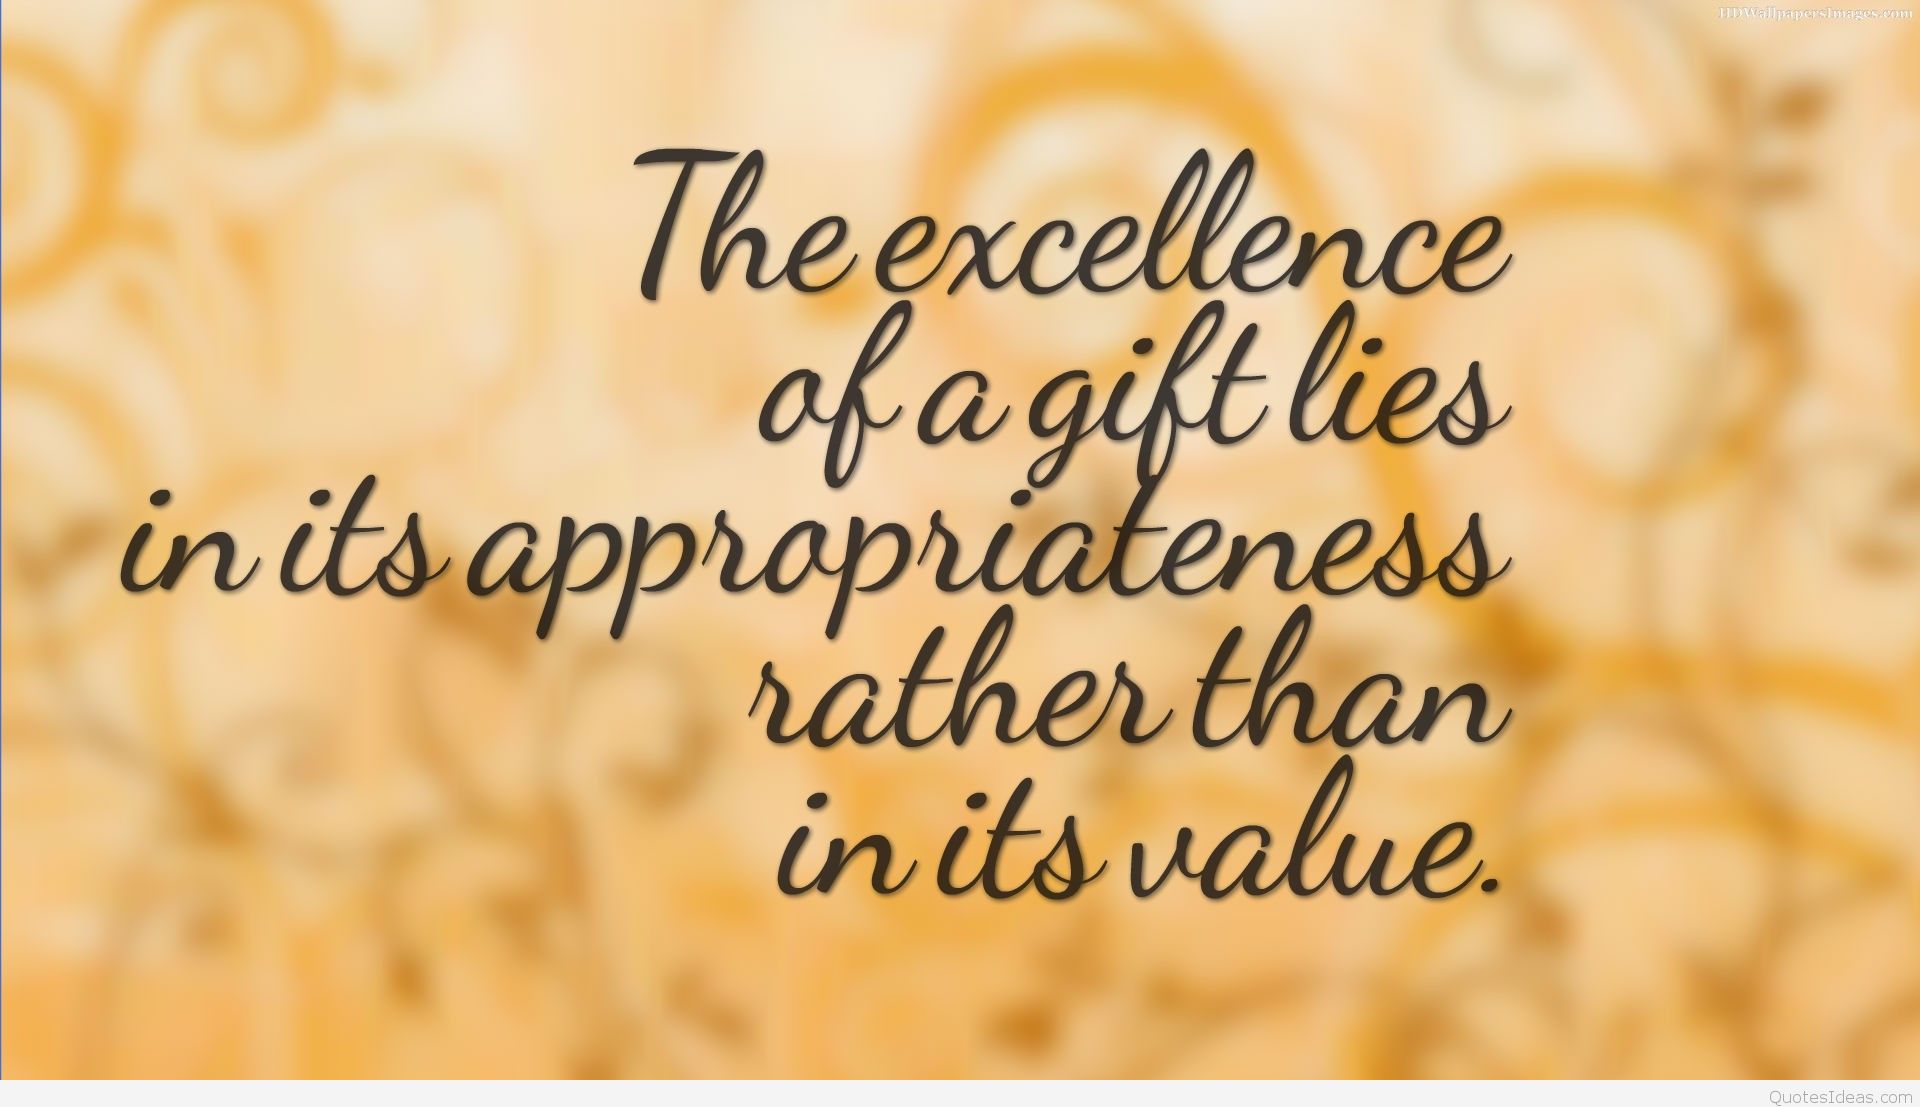 the excellence of a gift lies in its appropriateness rather than in its value